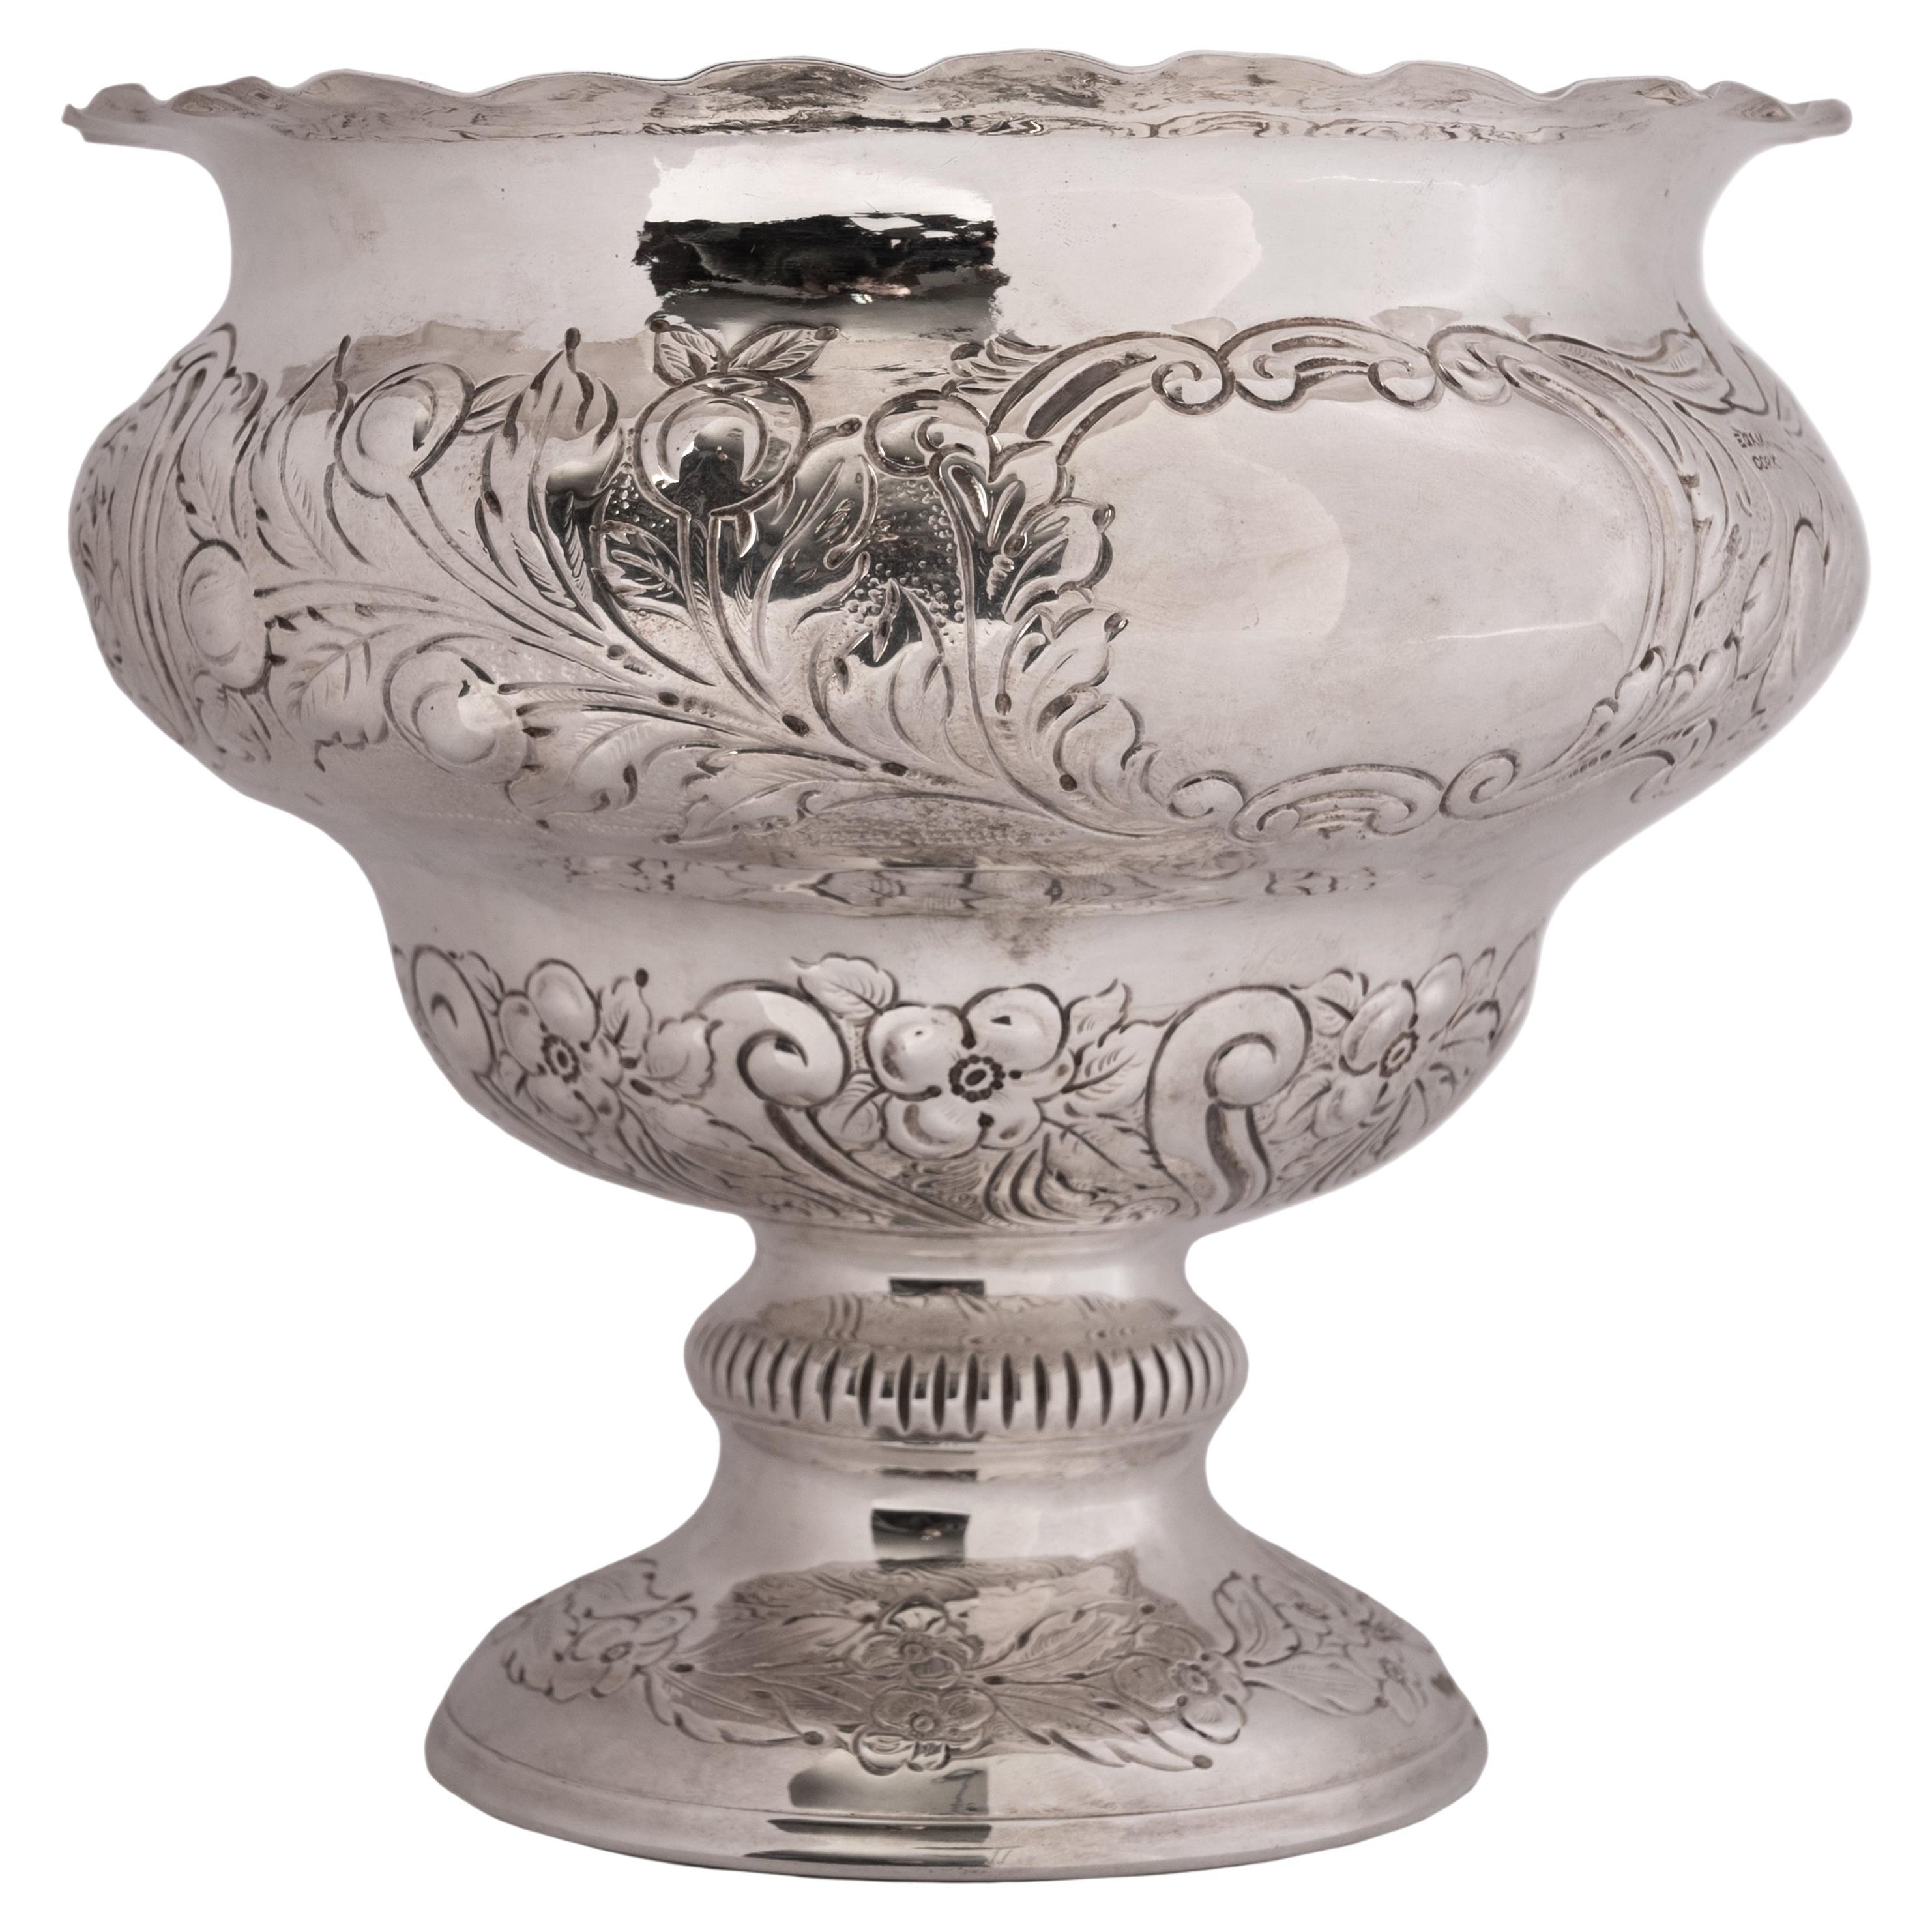 A fine antique Irish sterling silver footed bowl by William Egan, County Cork, 1911.
The bowl having an everted rim above a stepped globular body which is decorated with repousse work and also finely engraved, the bowl having a blank cartouche (no